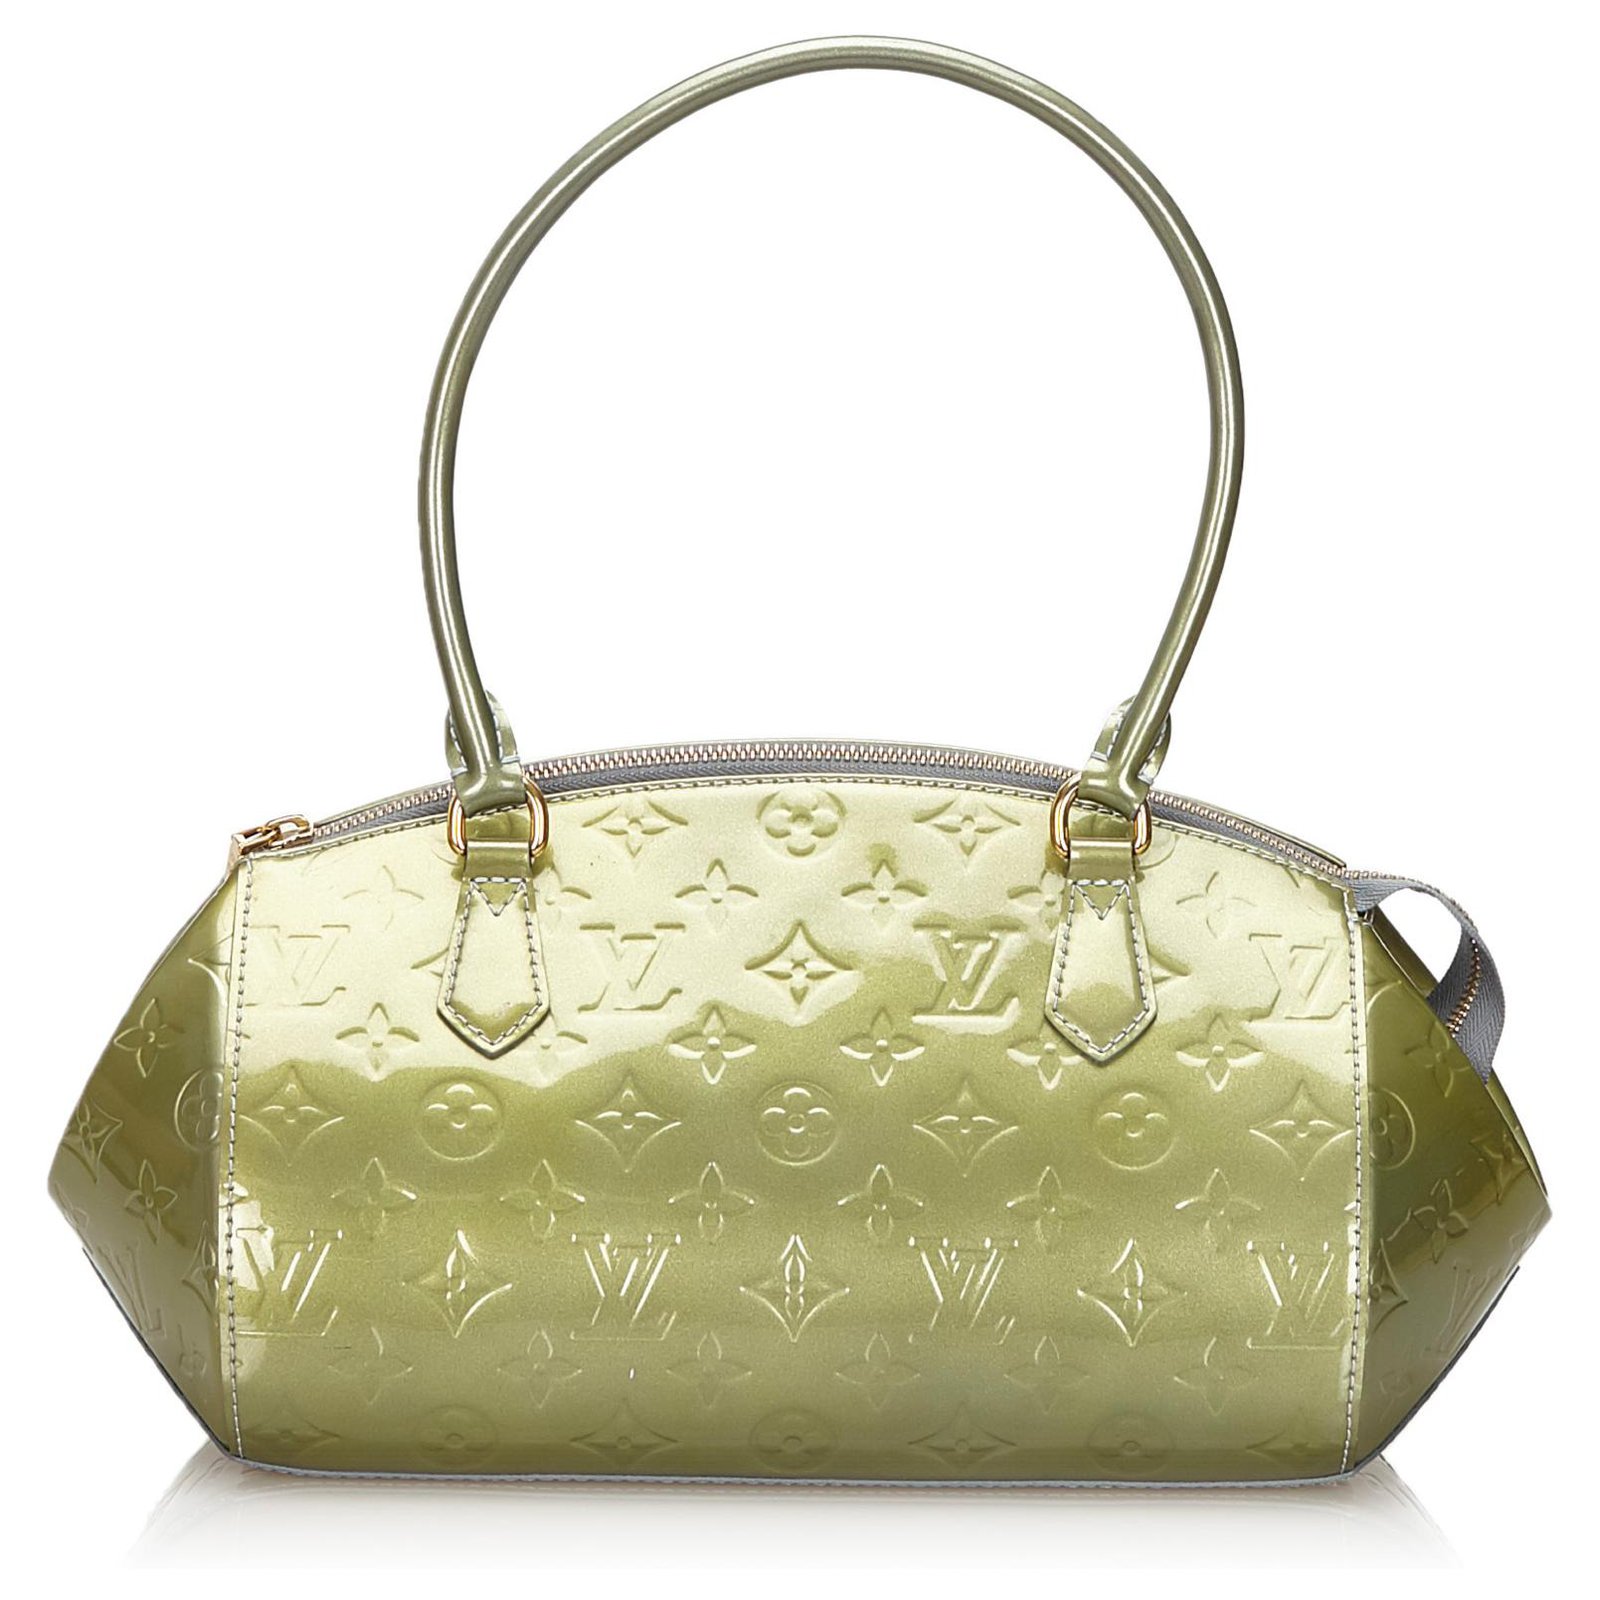 Sold at Auction: Ladies Olive Green Material & Leather Bag Marked “Louis  Vuitton Paris”